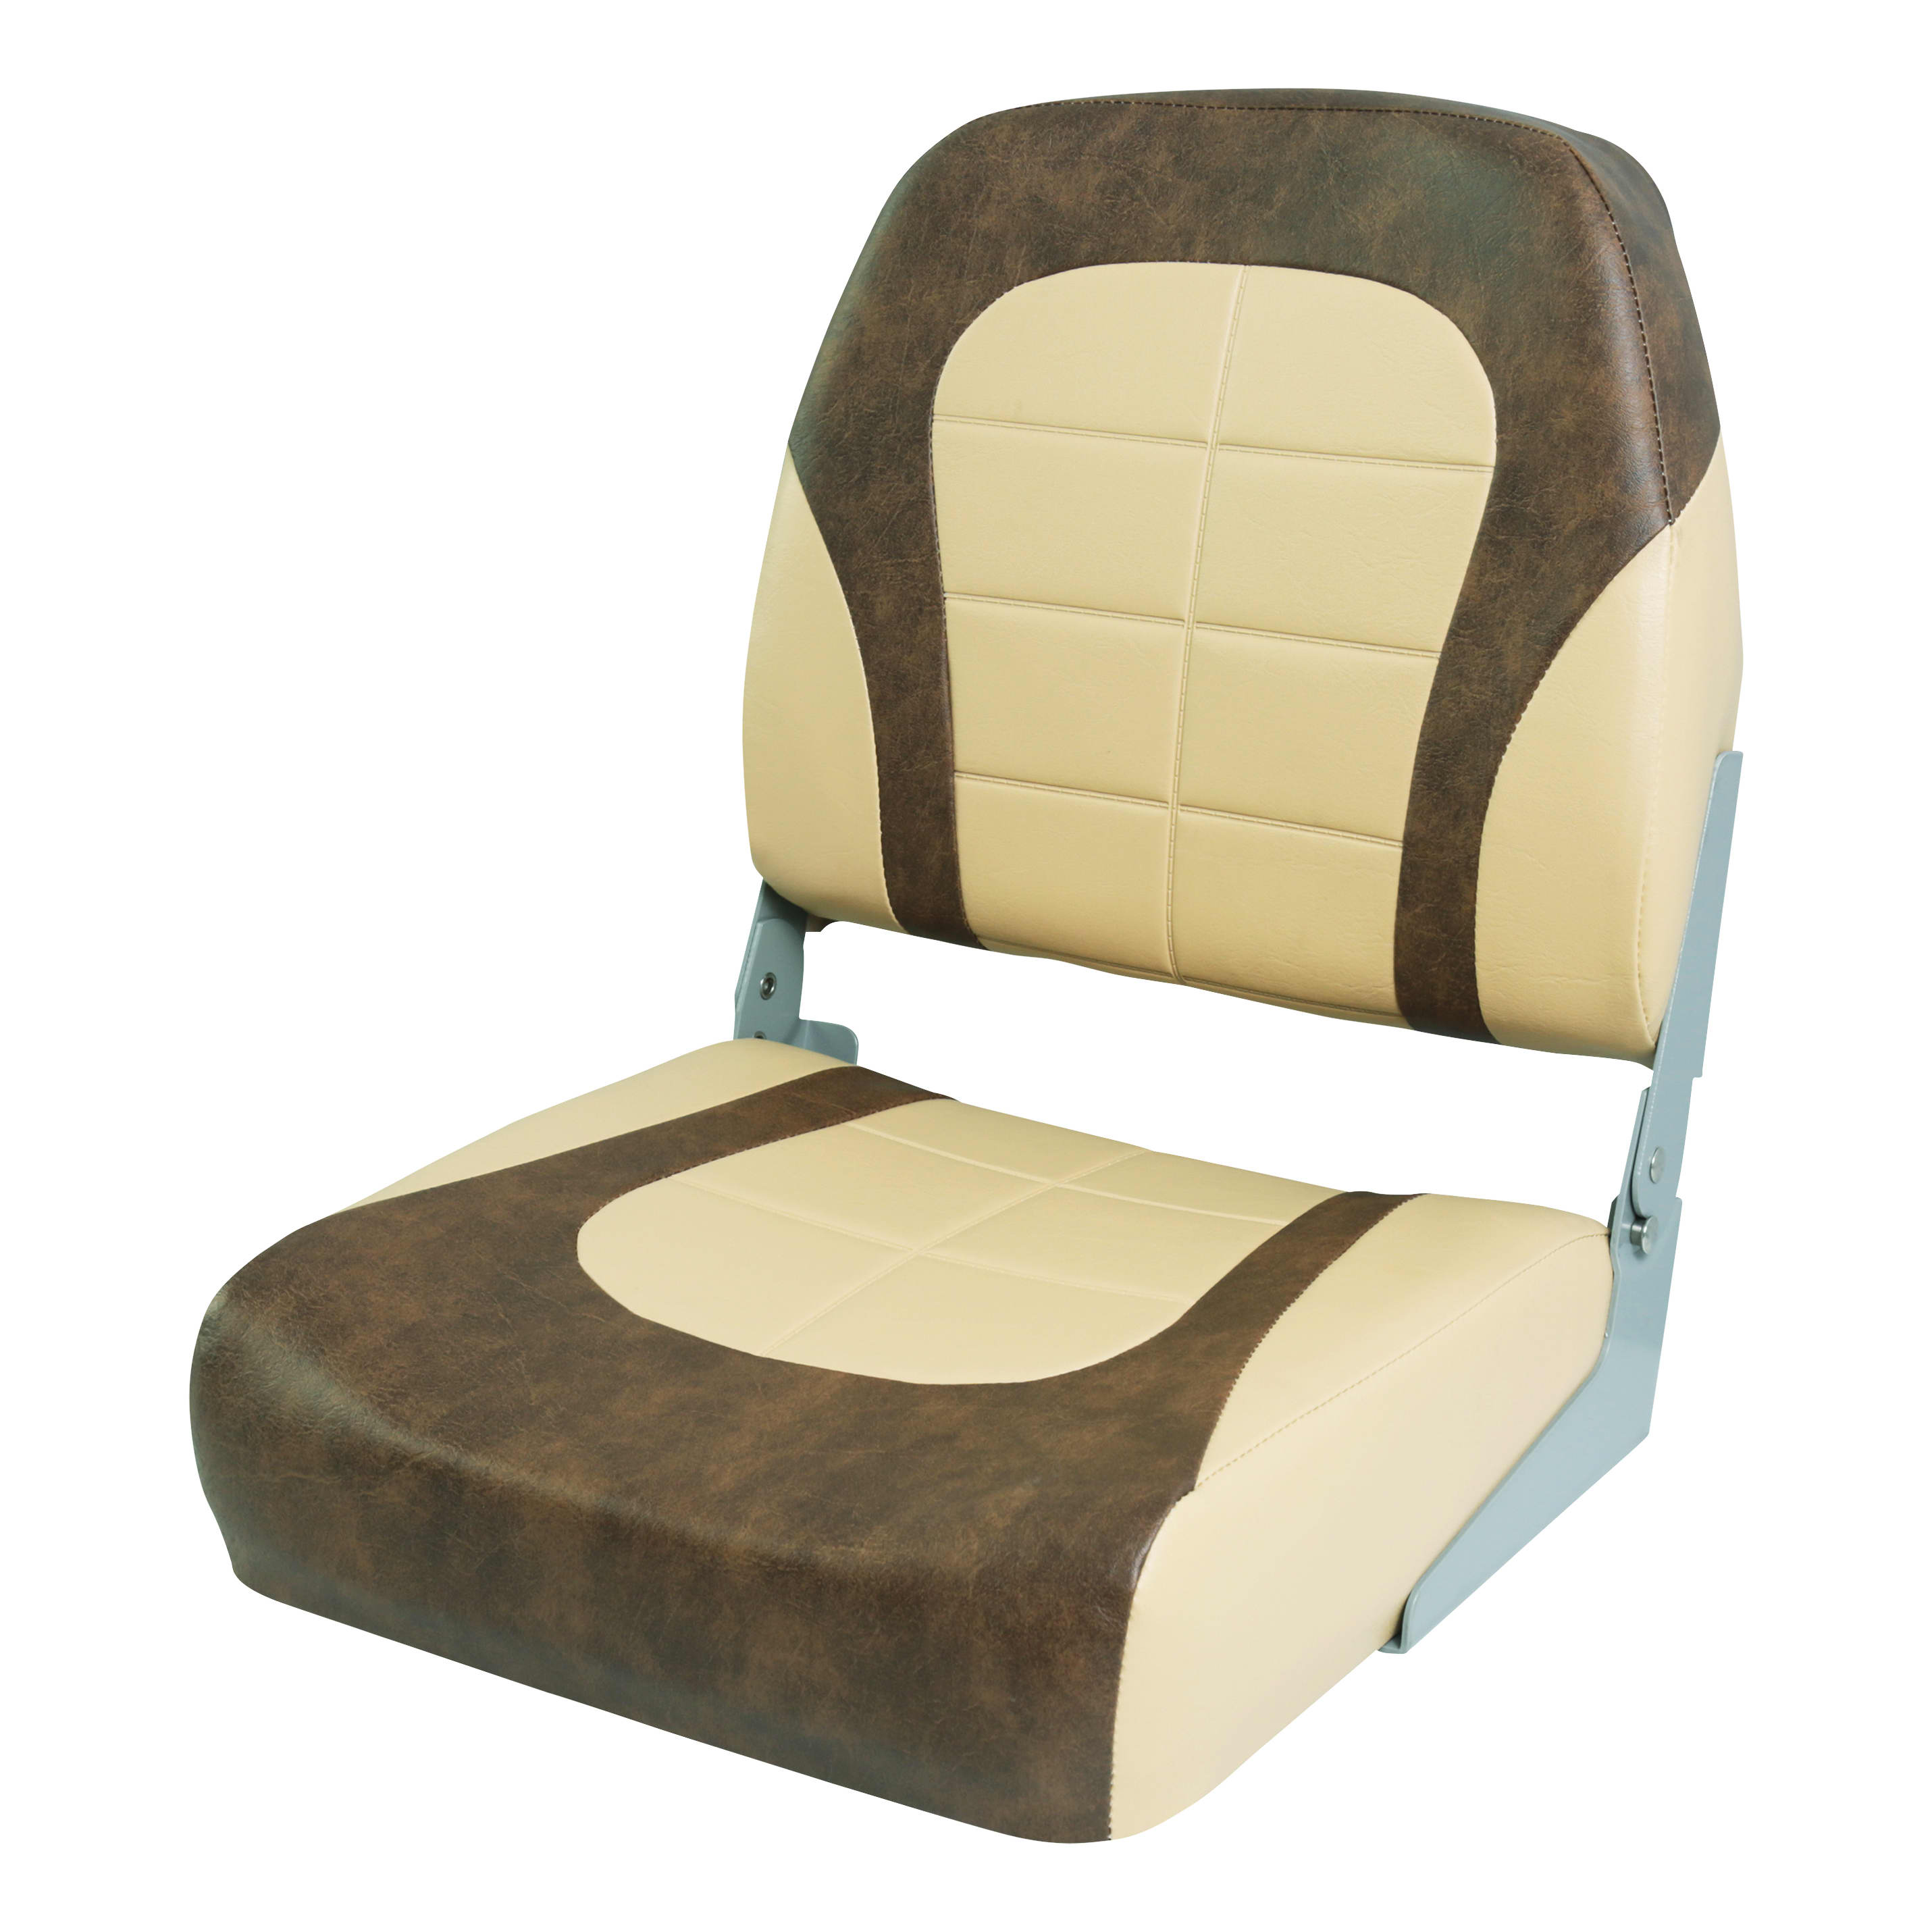 Bass Pro Shops® Tournament Pro Low-Back Boat Seat - Sand/Brown